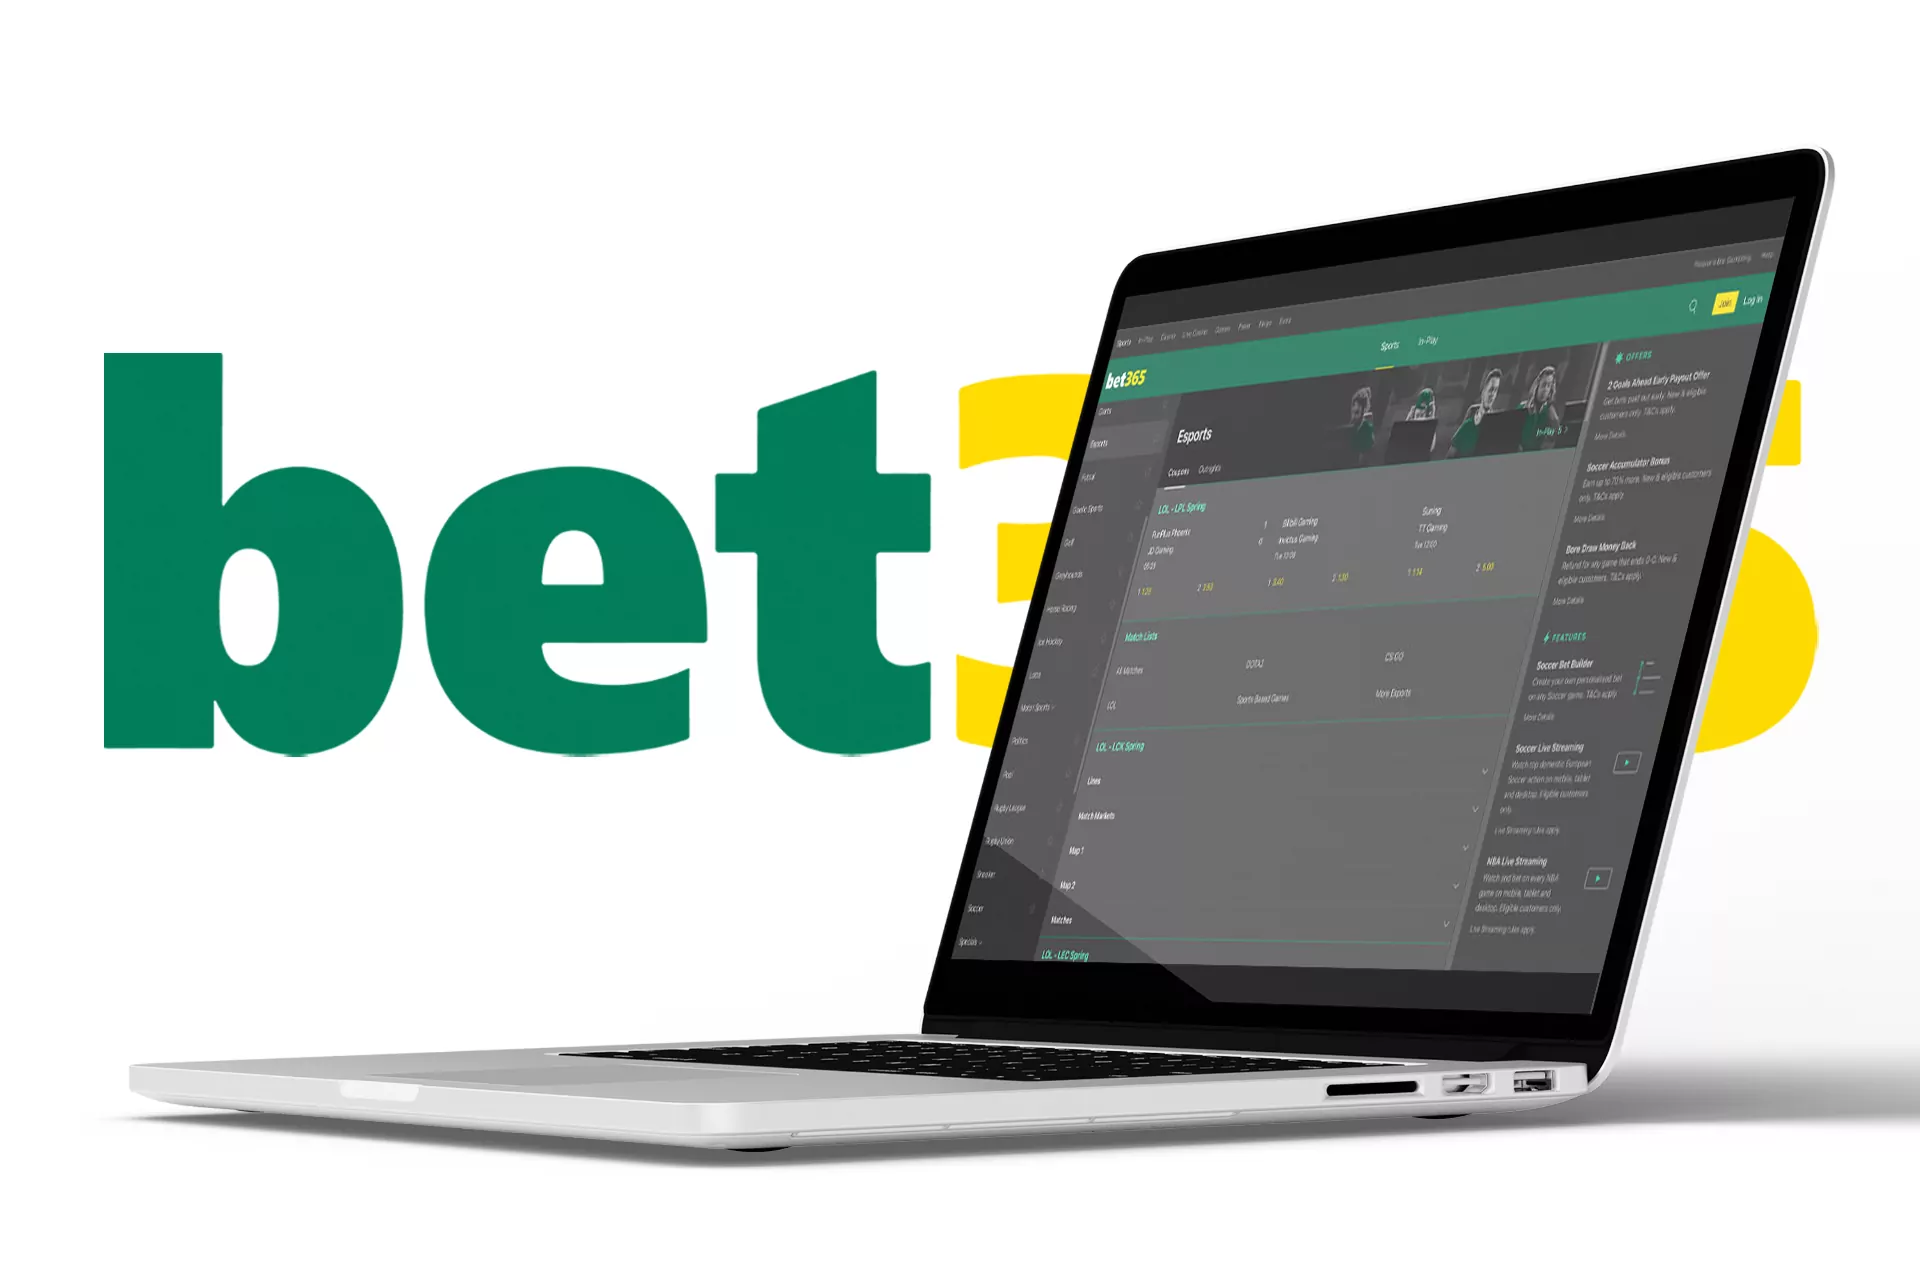 At bet365 you can place bets on Starcraft II, Fortnite, LoL and other esports disciplines.